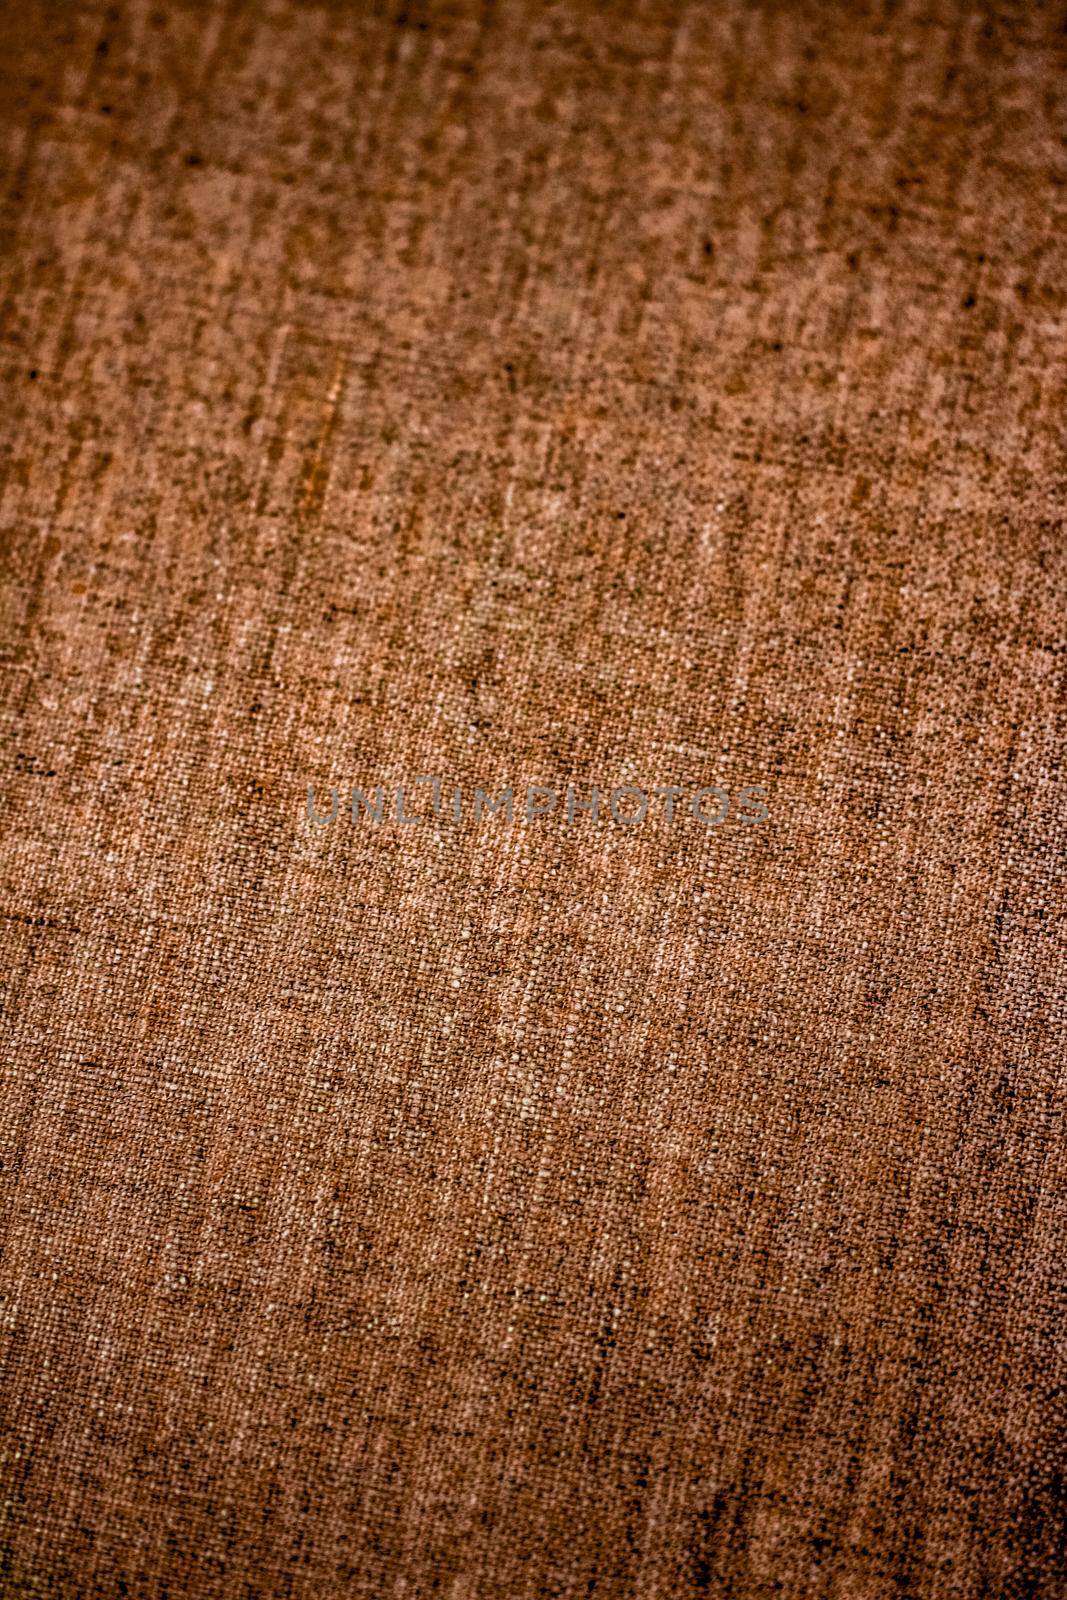 Textile material, natural surface and vintage decor texture concept - Decorative vintage linen fabric textured background for interior, furniture design and art canvas backdrop